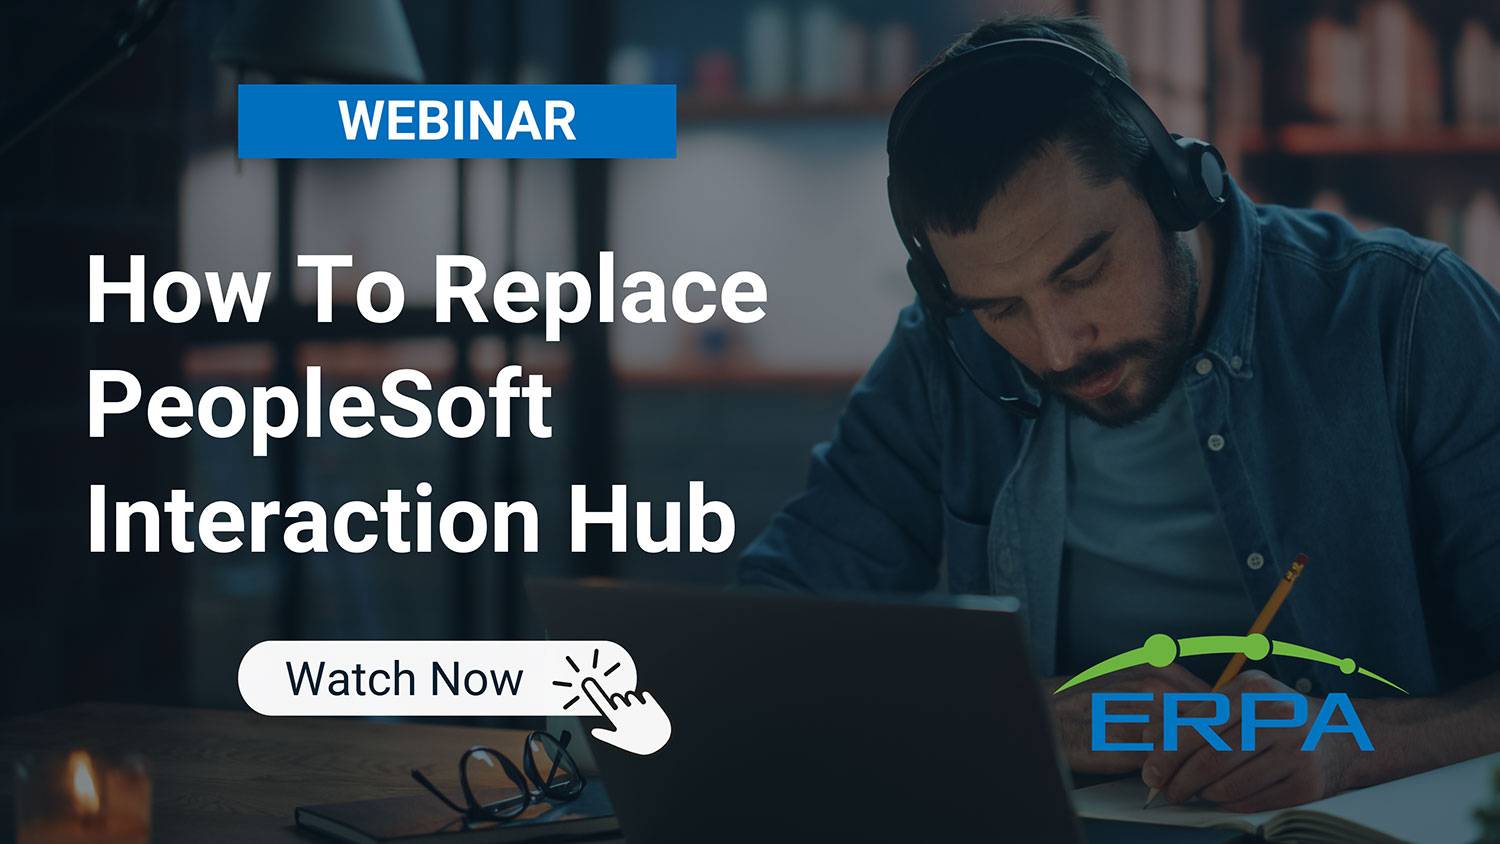 ERPA Webinar: How To Replace PeopleSoft Interaction Hub